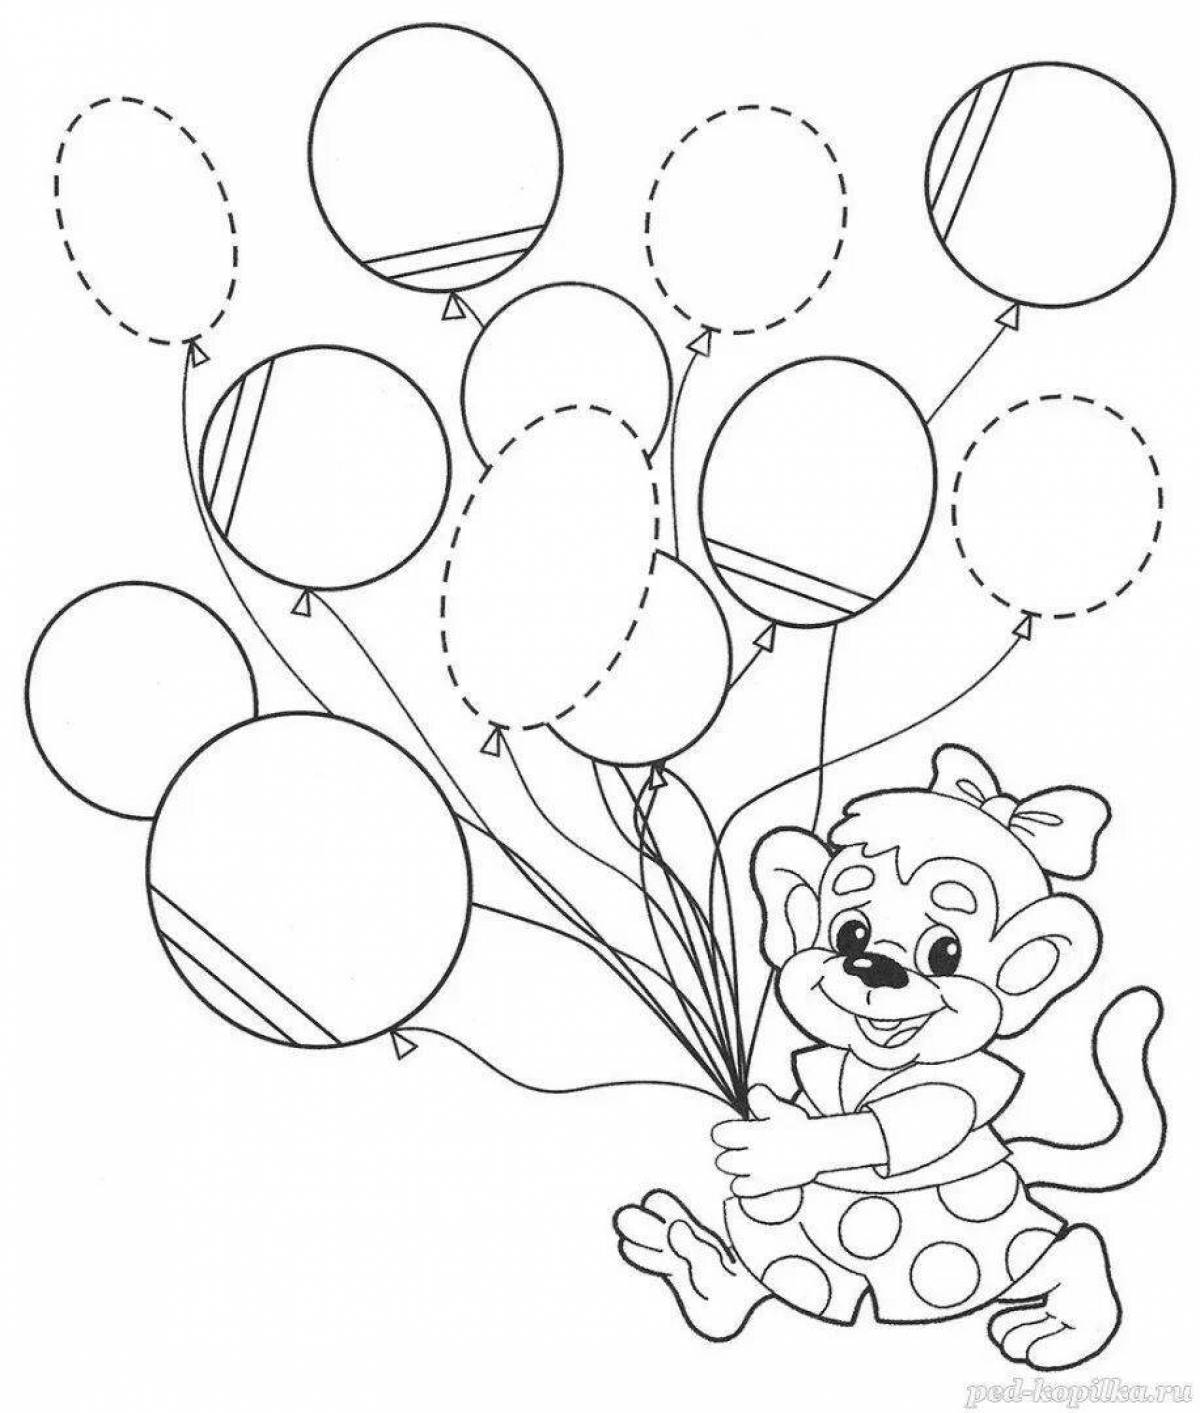 Balloons for children 2-3 years old